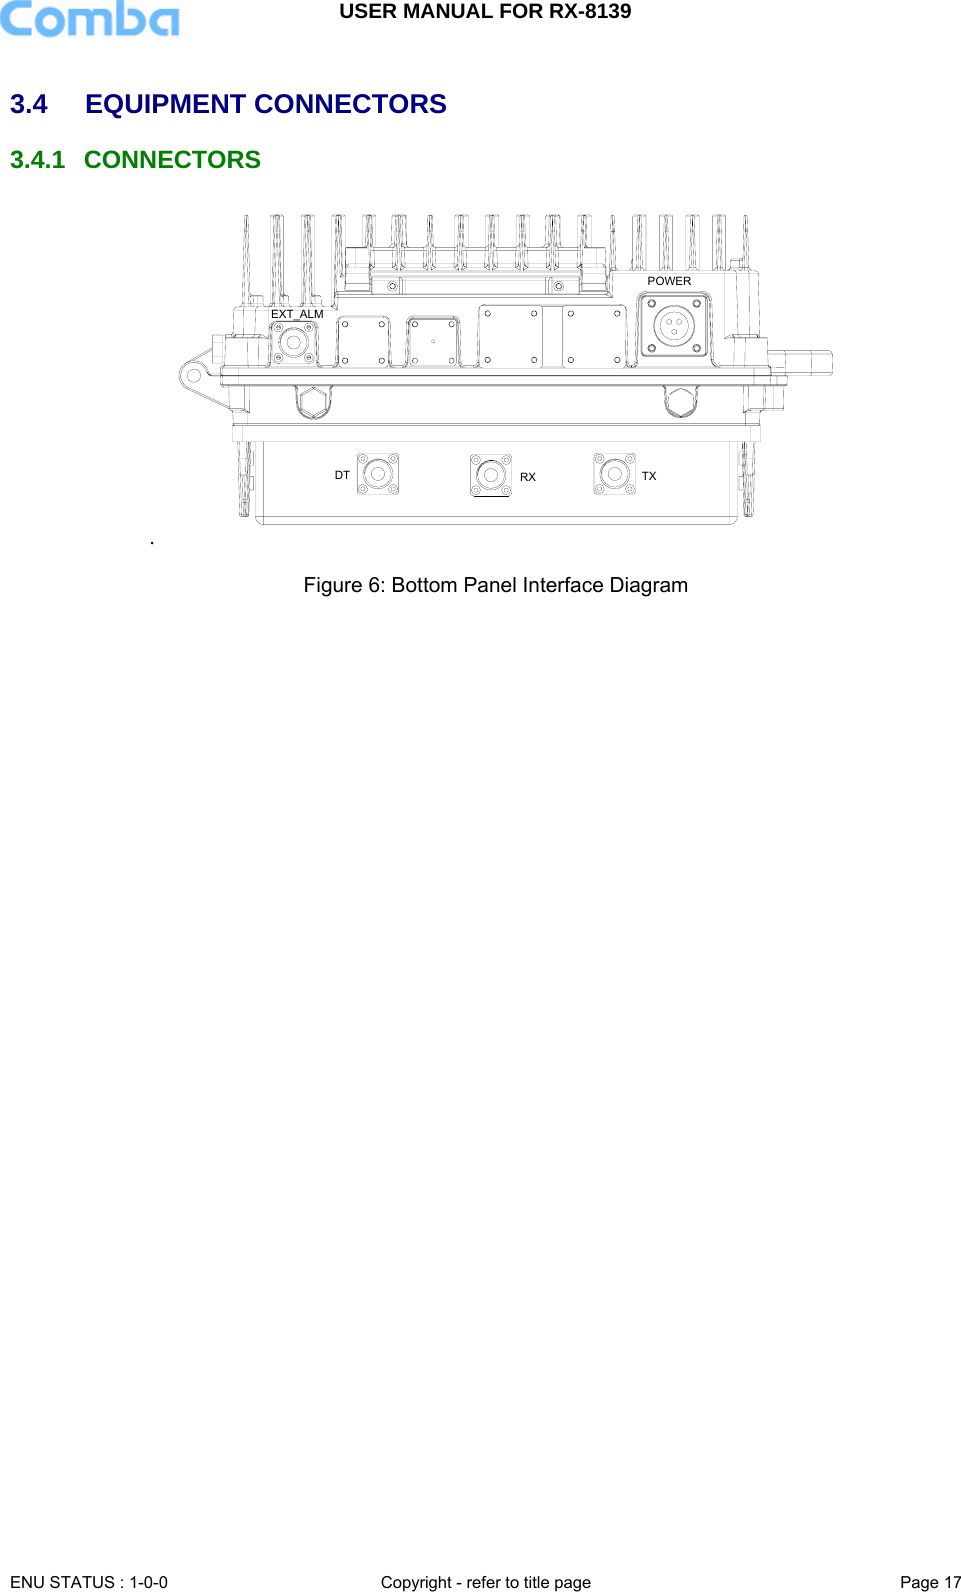 USER MANUAL FOR RX-8139    ENU STATUS : 1-0-0  Copyright - refer to title page  Page 17   3.4 EQUIPMENT CONNECTORS 3.4.1 CONNECTORS . EXT_ALMPOWERDT TXRX  Figure 6: Bottom Panel Interface Diagram     